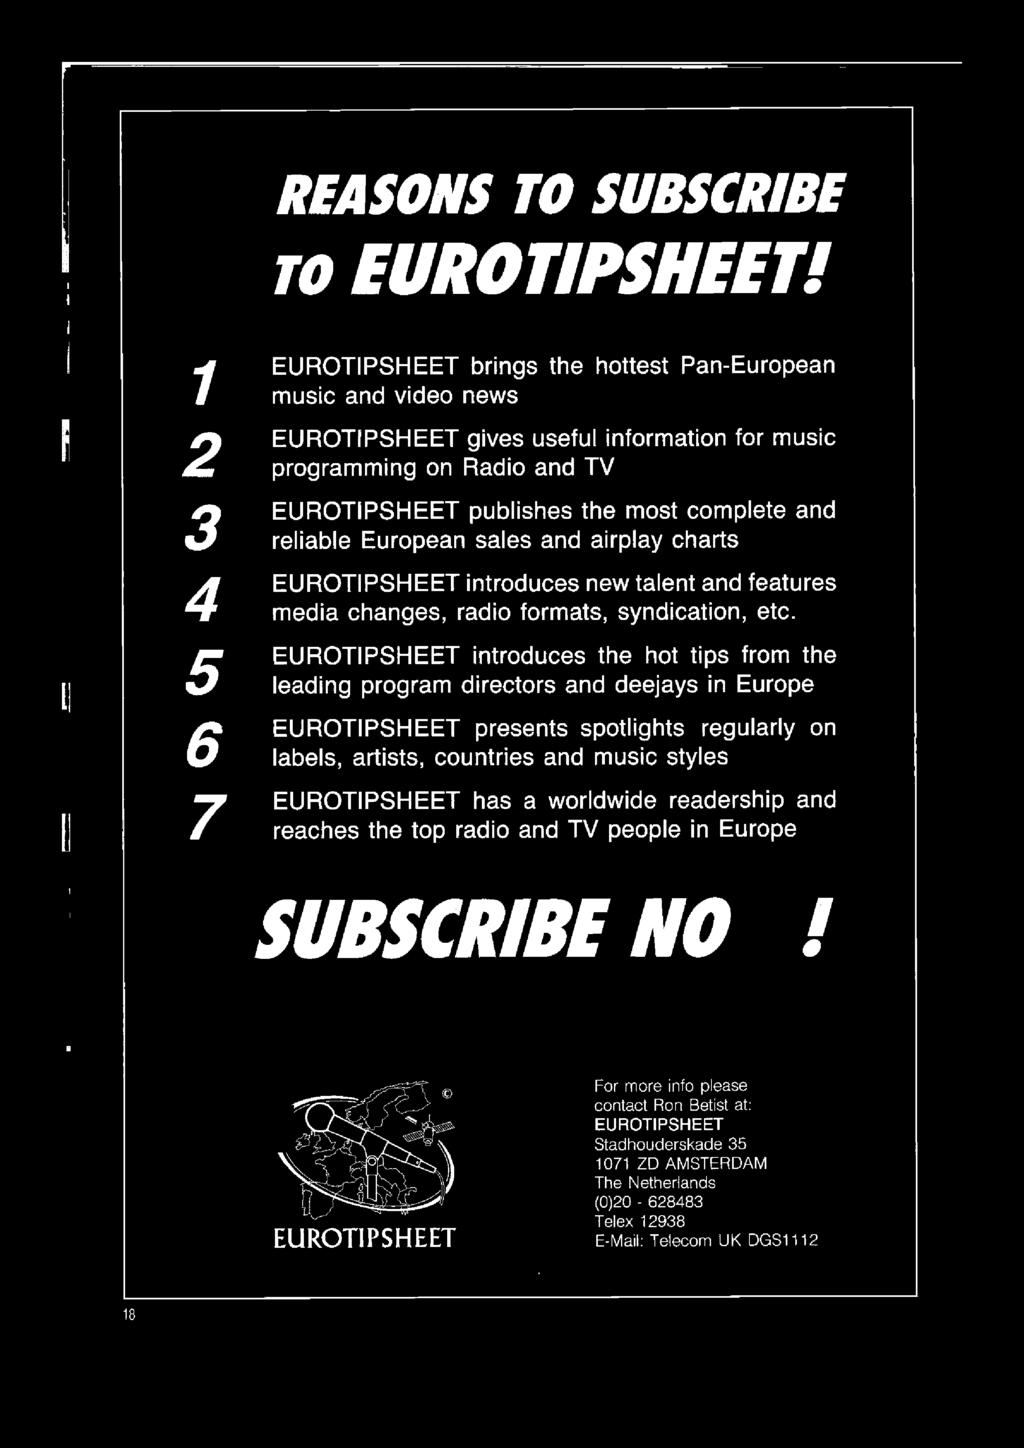 EUROTIPSHEET introduces the hot tips from the leading program directors and deejays in Europe EUROTIPSHEET presents spotlights regularly on